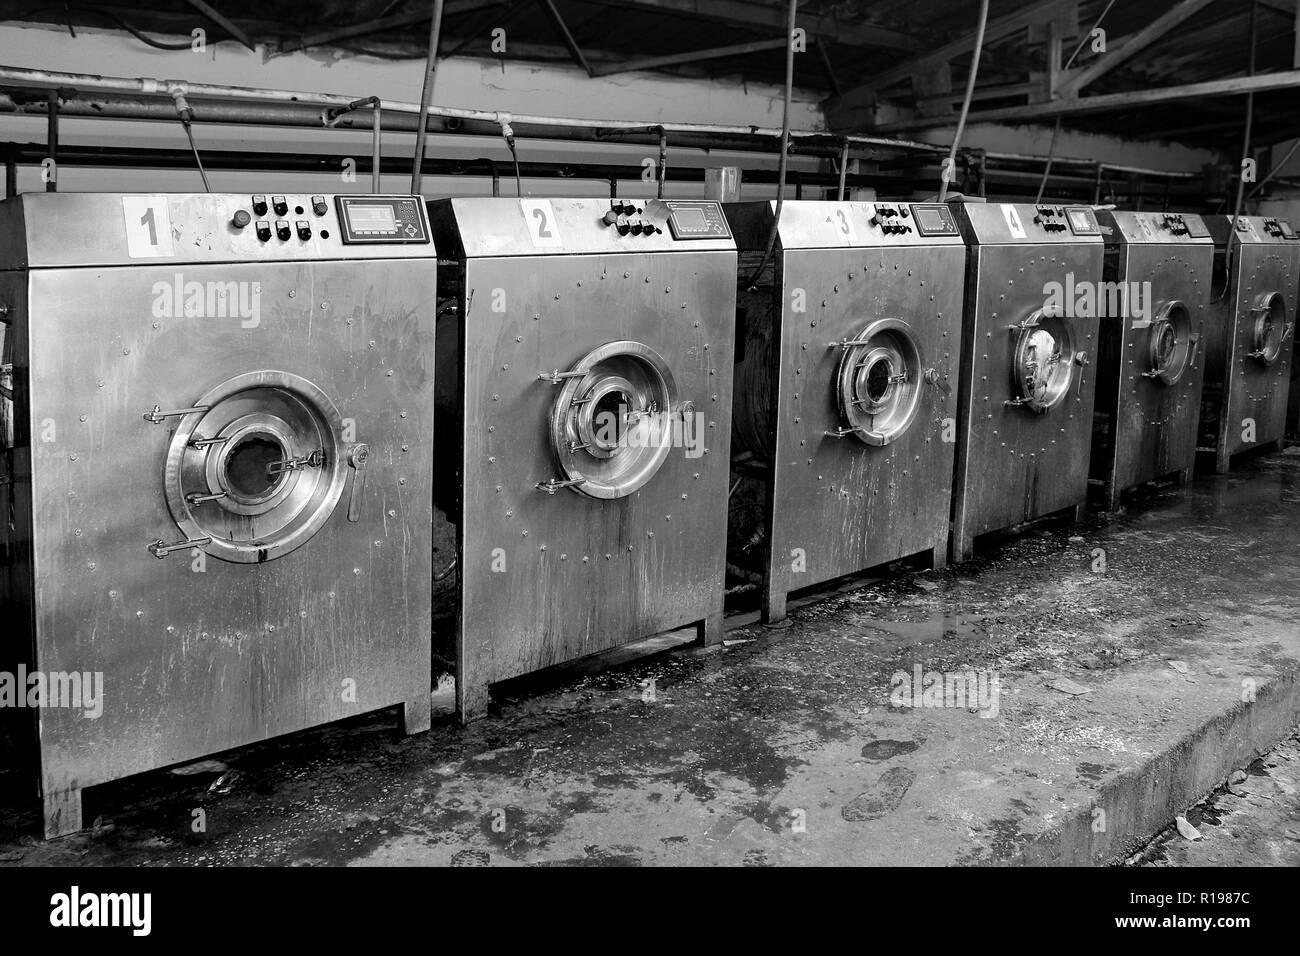 Black and white workshop of old washing machines with old washing machines Stock Photo